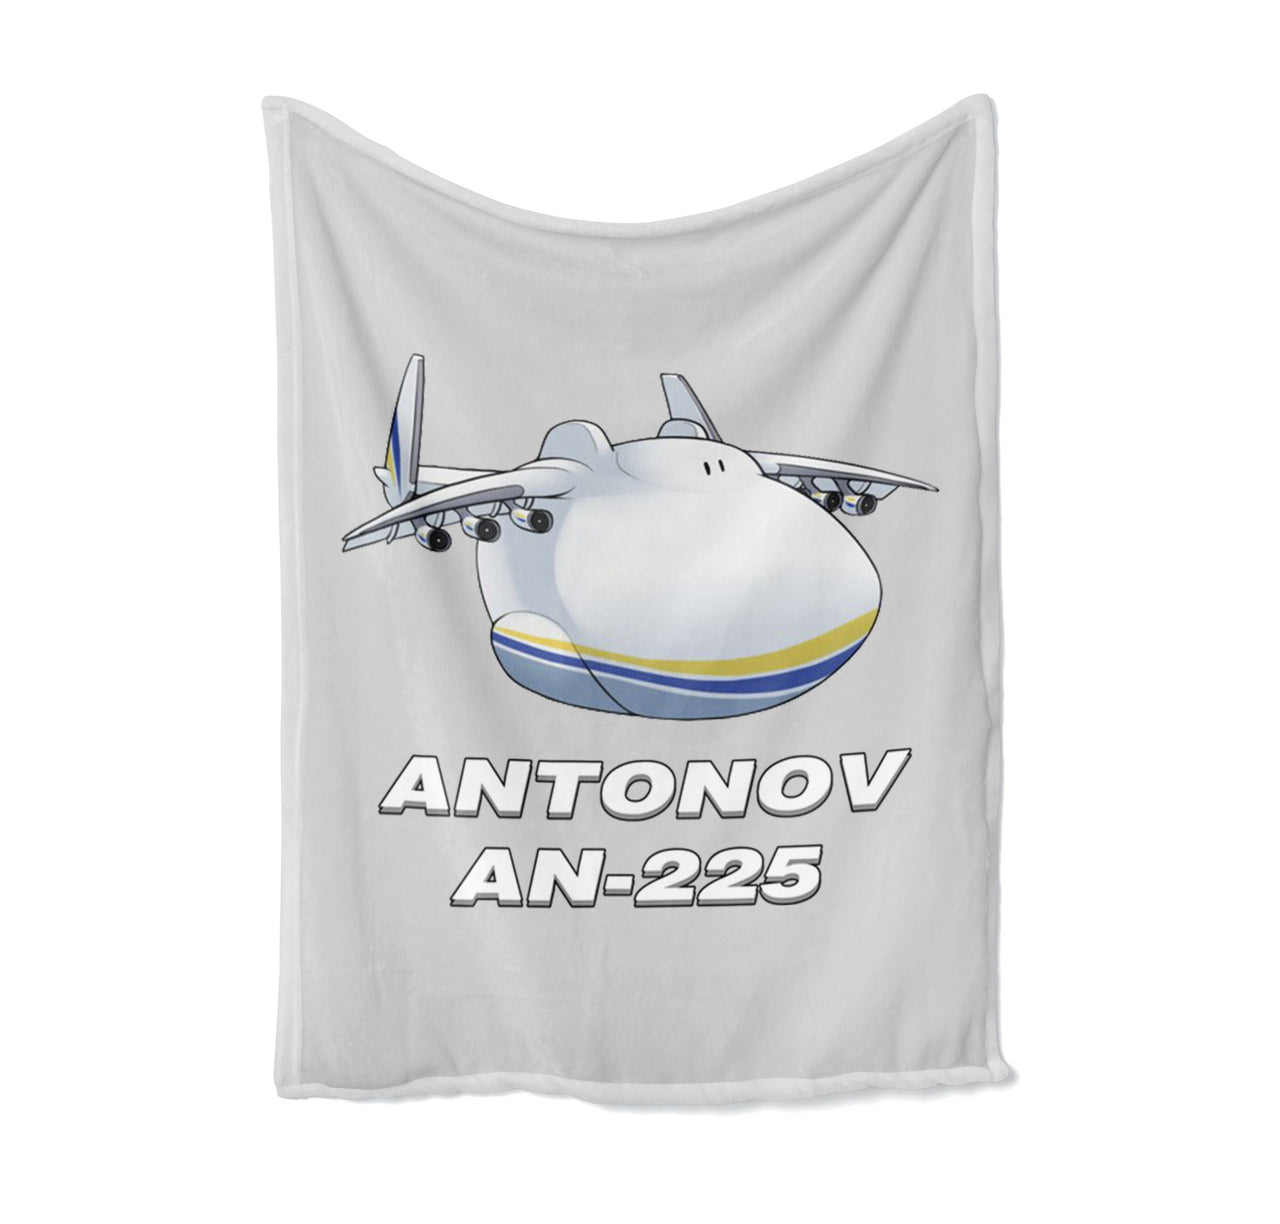 Antonov AN-225 (21) Designed Bed Blankets & Covers